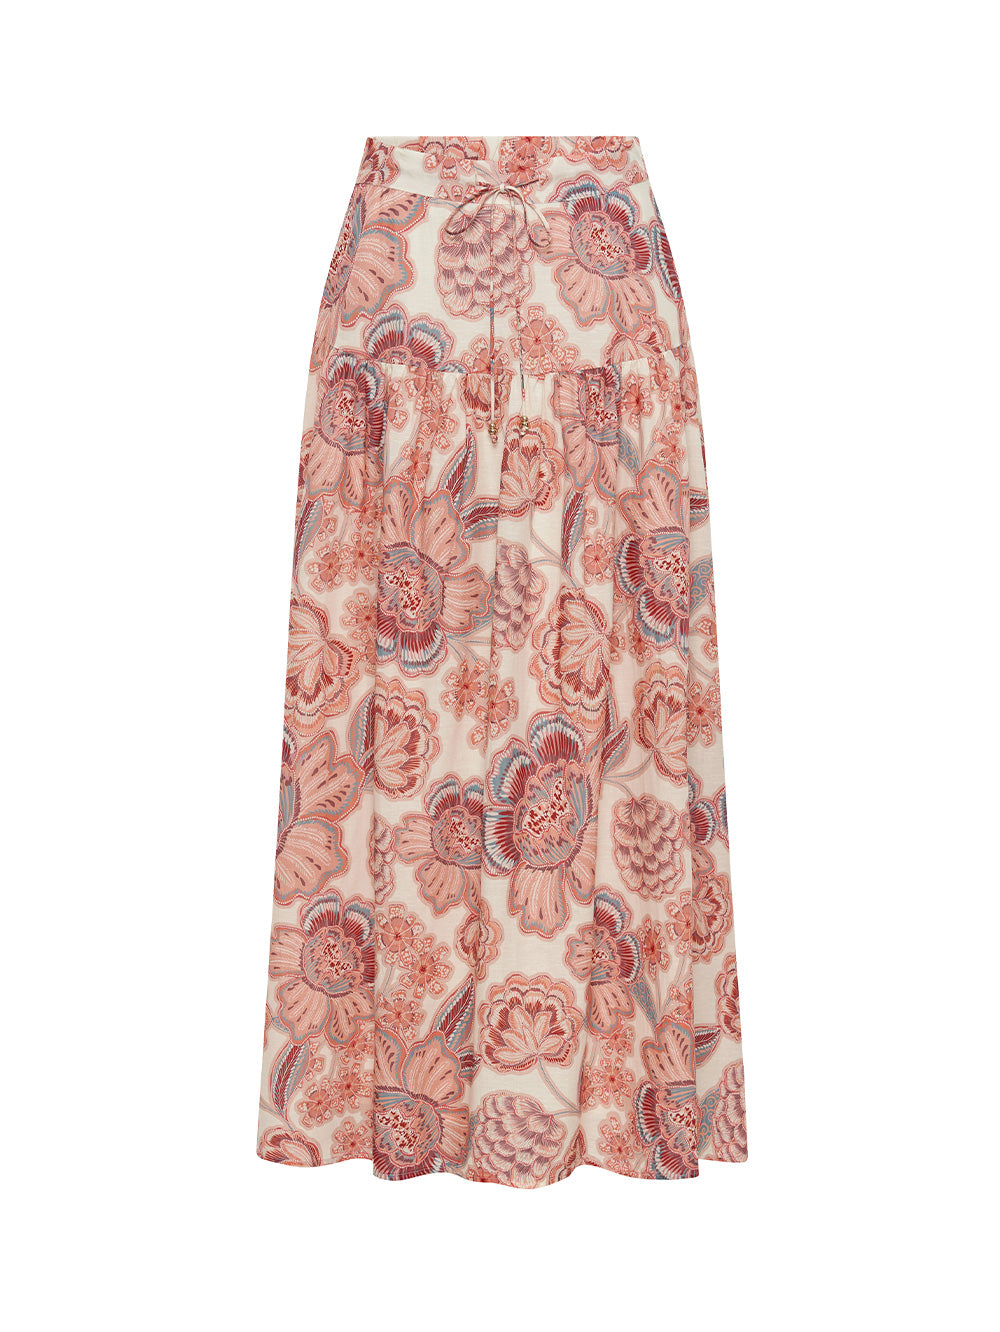 Ghost image of the KIVARI Maya Maxi Skirt: A pink and red floral on a natural base featuring a flat waistband front and elasticated back with front tie, side zipper and a gathered tiered skirt.